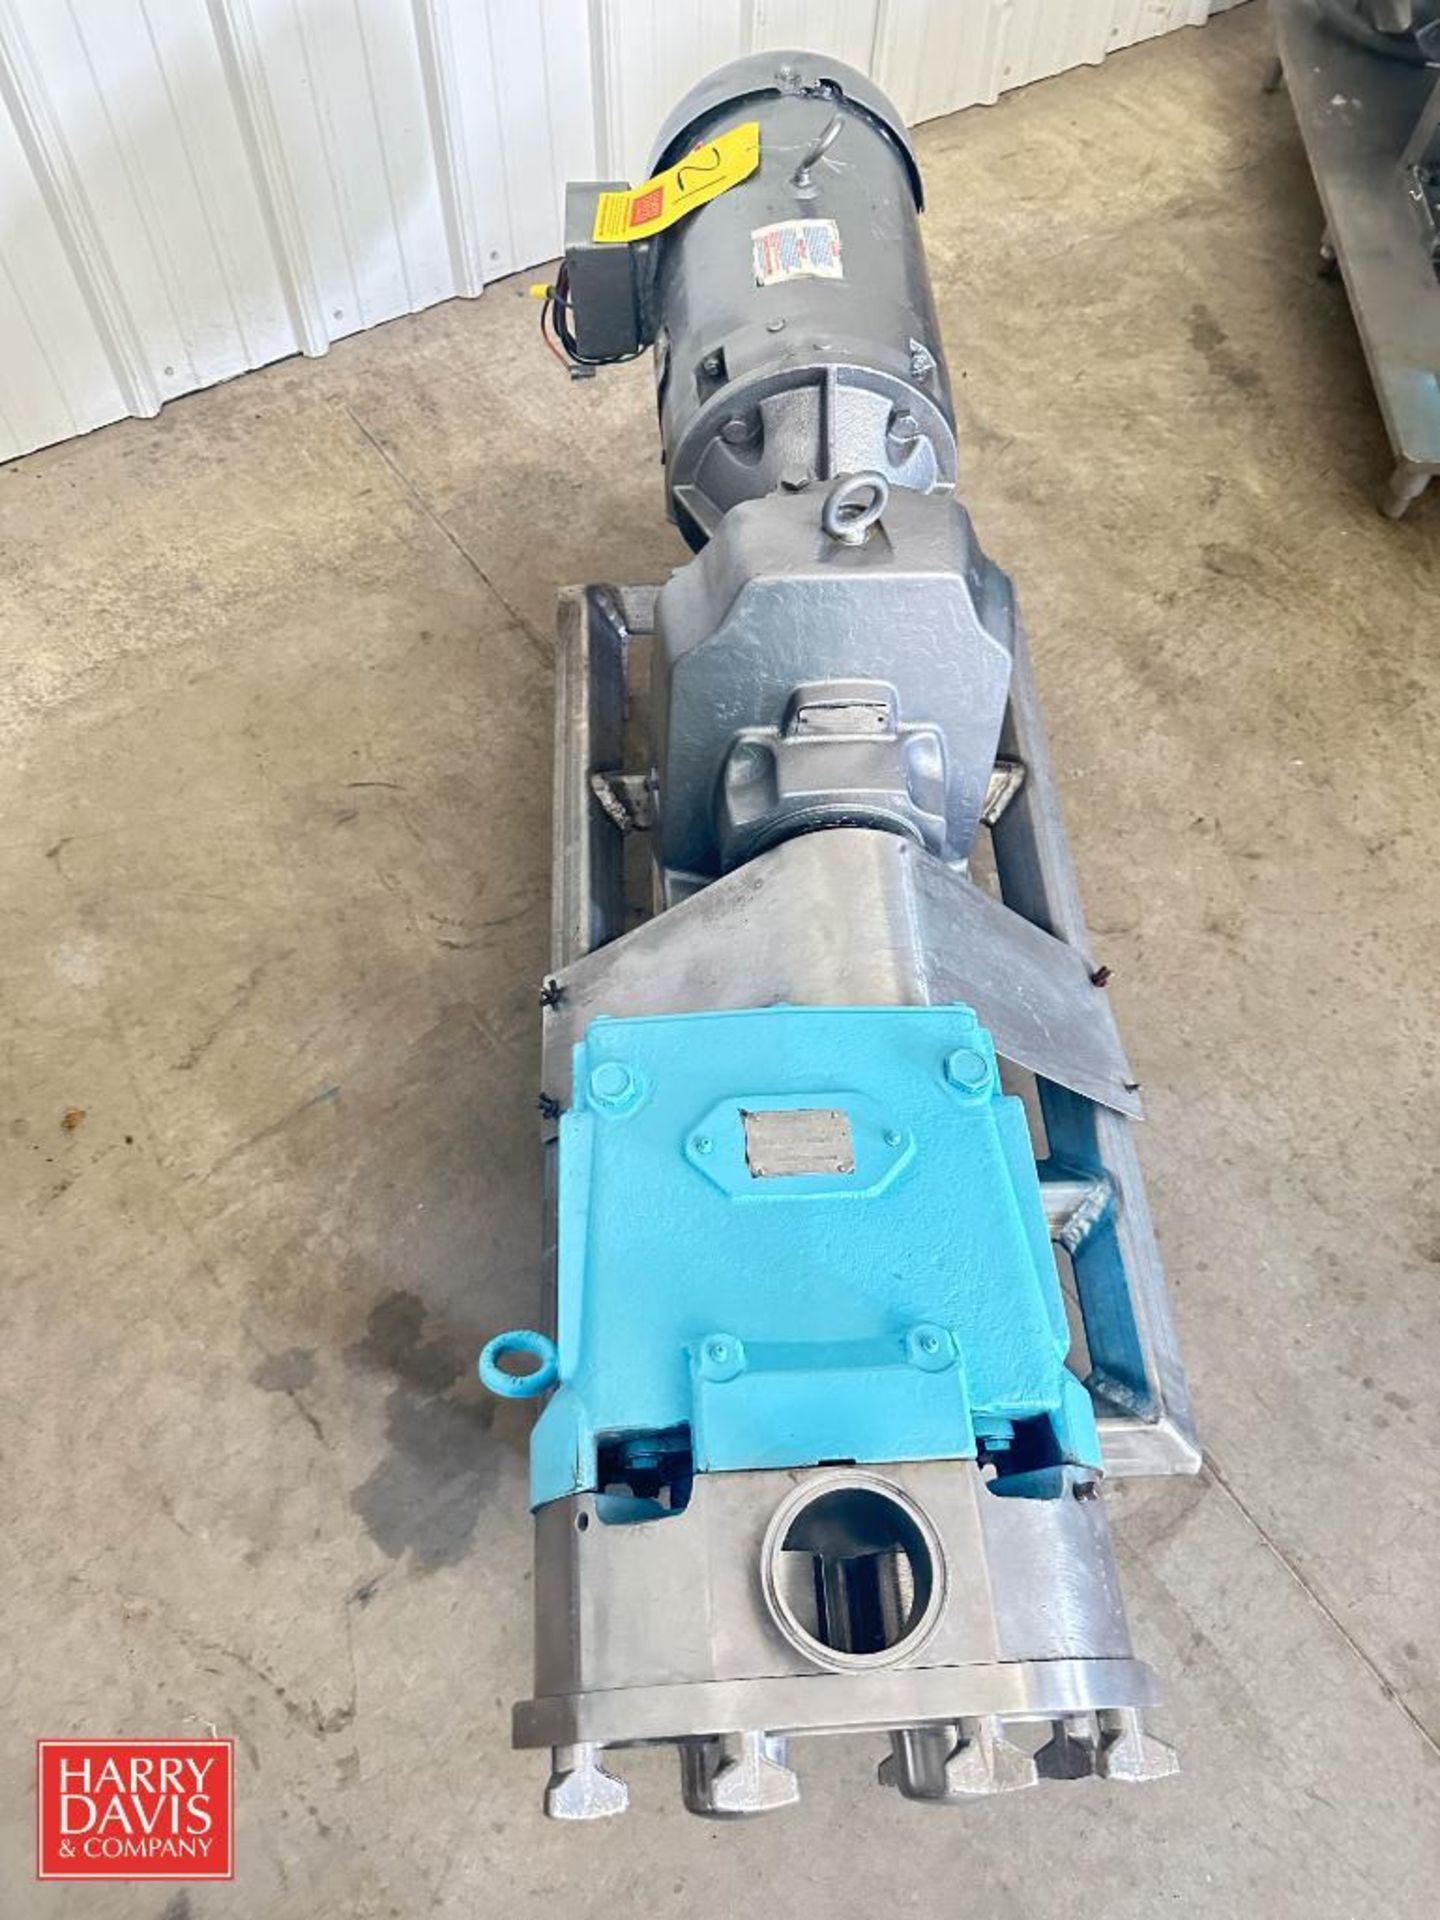 Waukesha Cherry-Burrell Positive Displacement Pump, Model: 120-U1 and Gear Reducing Drive - Image 2 of 5